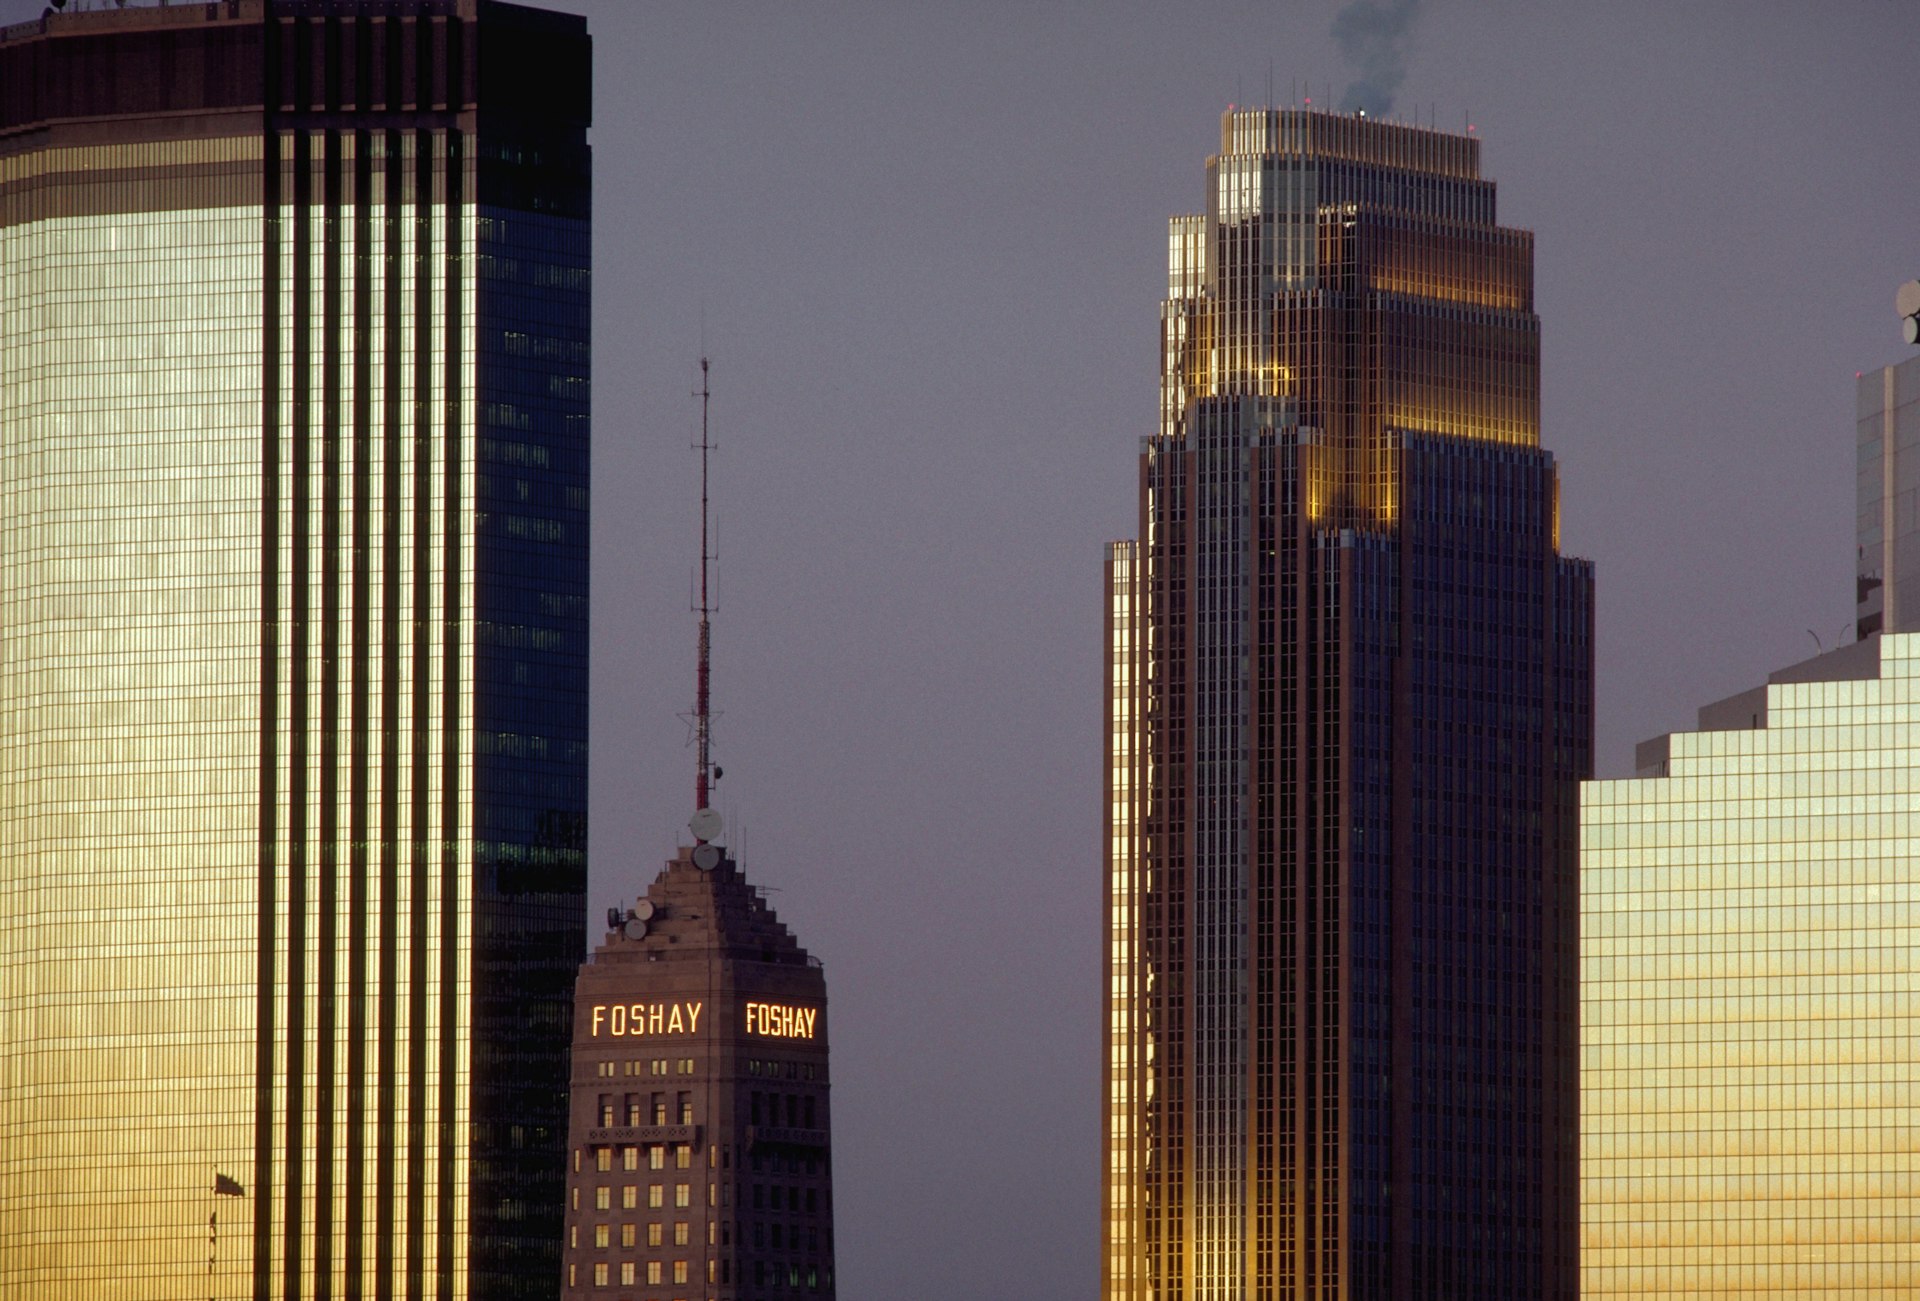 The Foshay Tower flanked by taller modern office towers